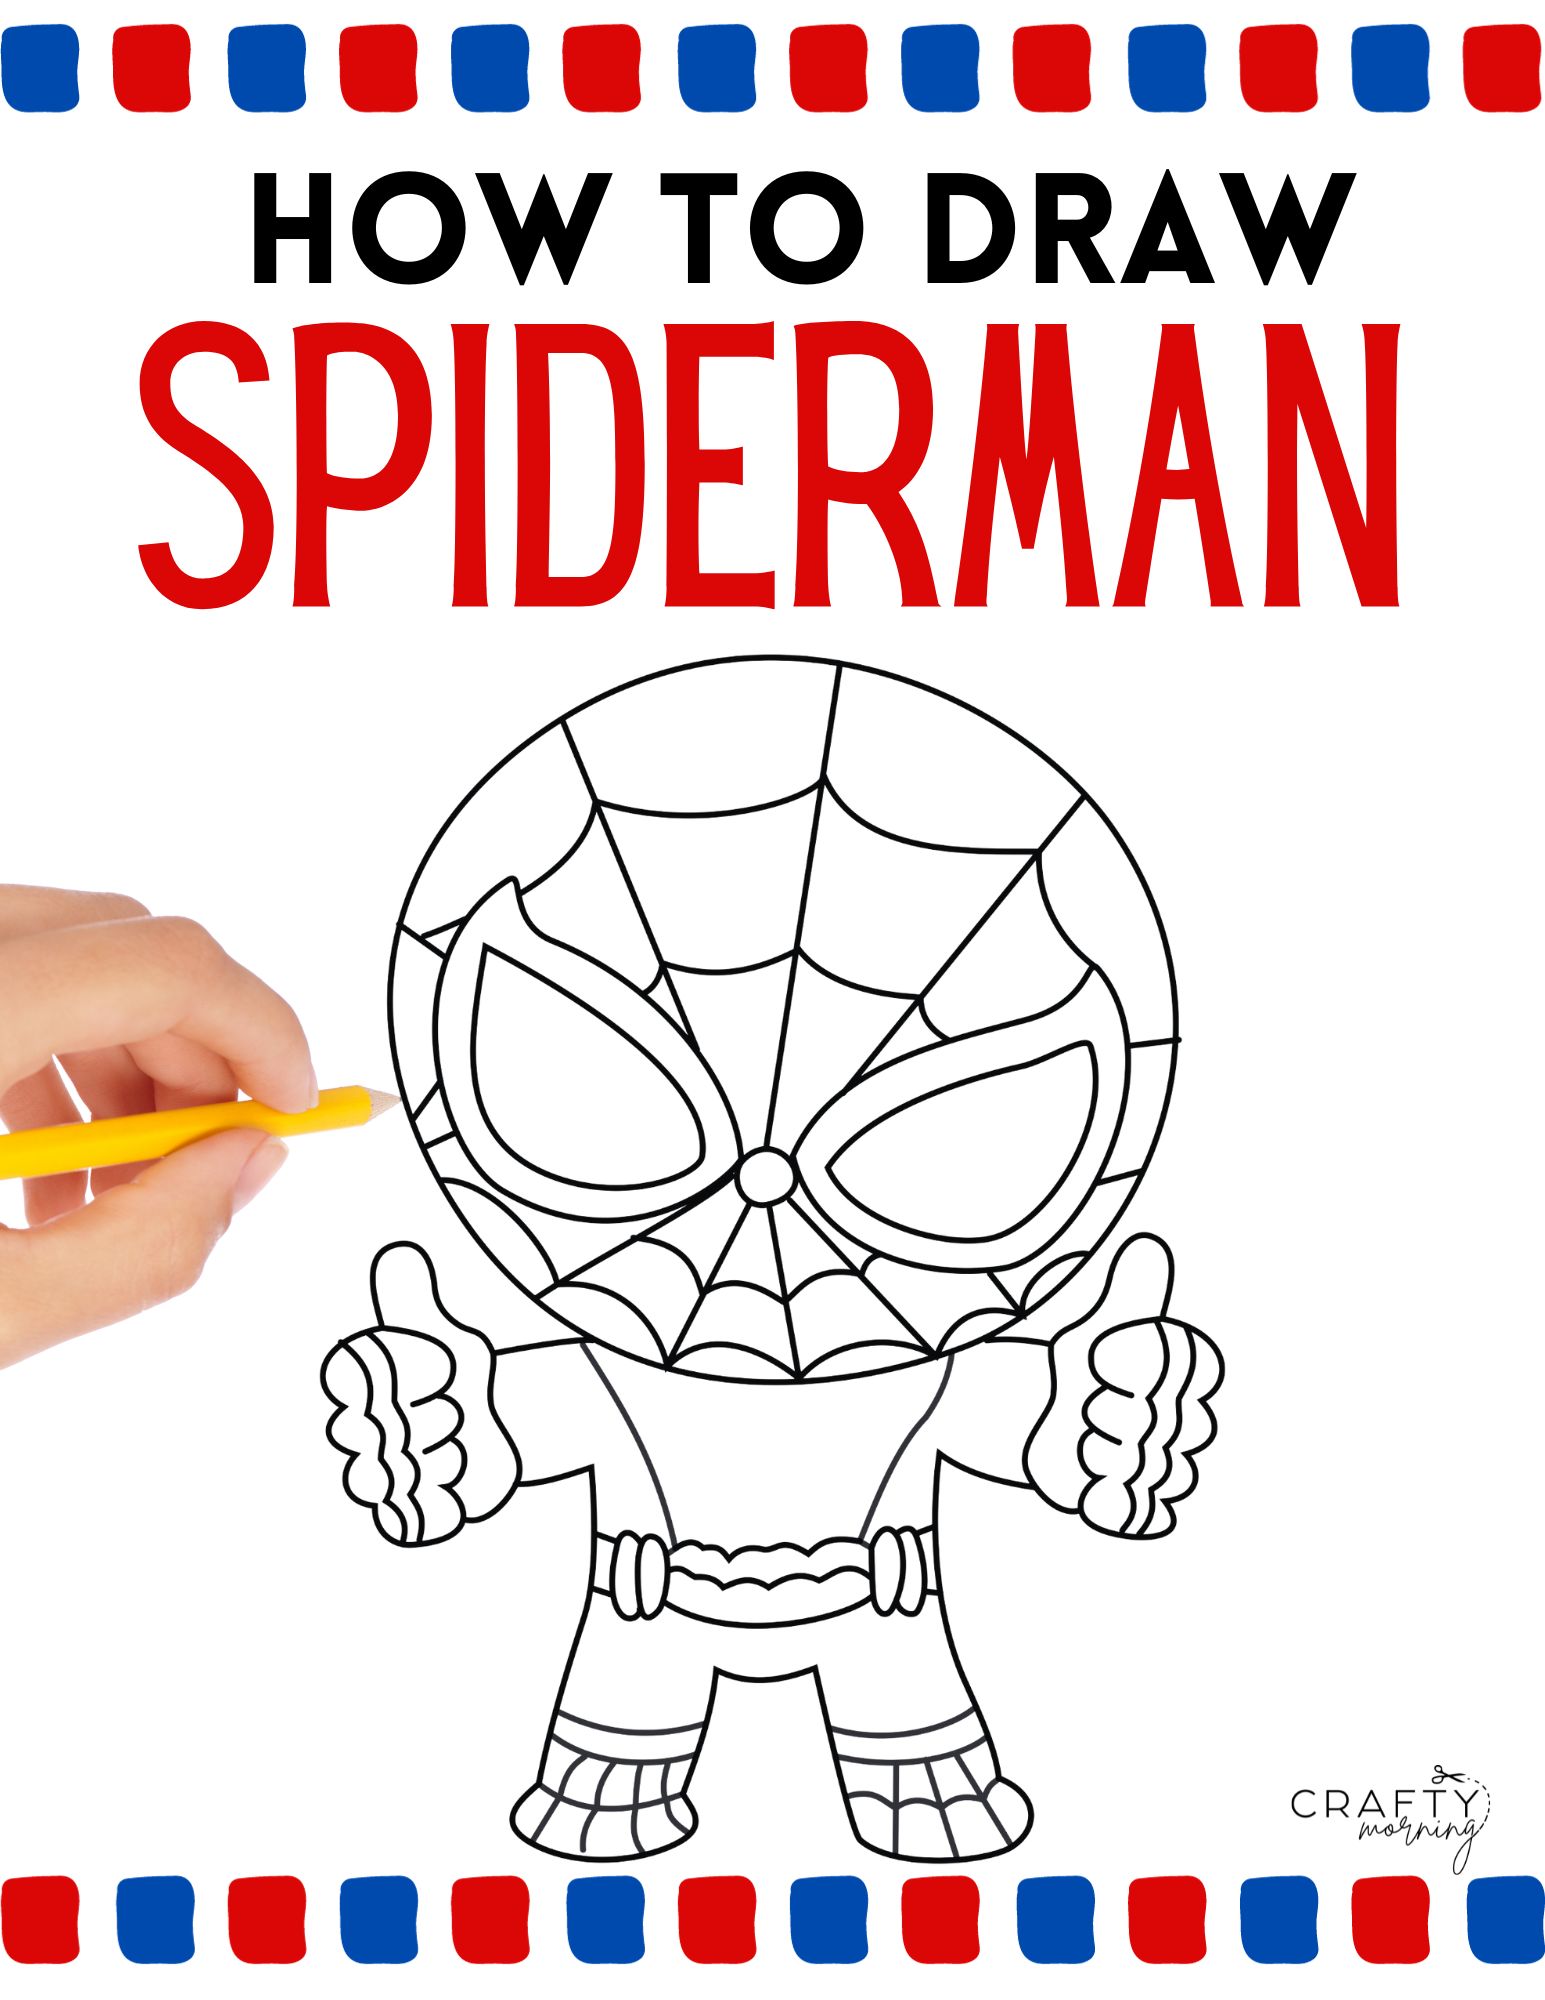 How To Draw Spiderman Easy For Kids | Spiderman drawing, Drawing for kids,  Cartoon drawing for kids